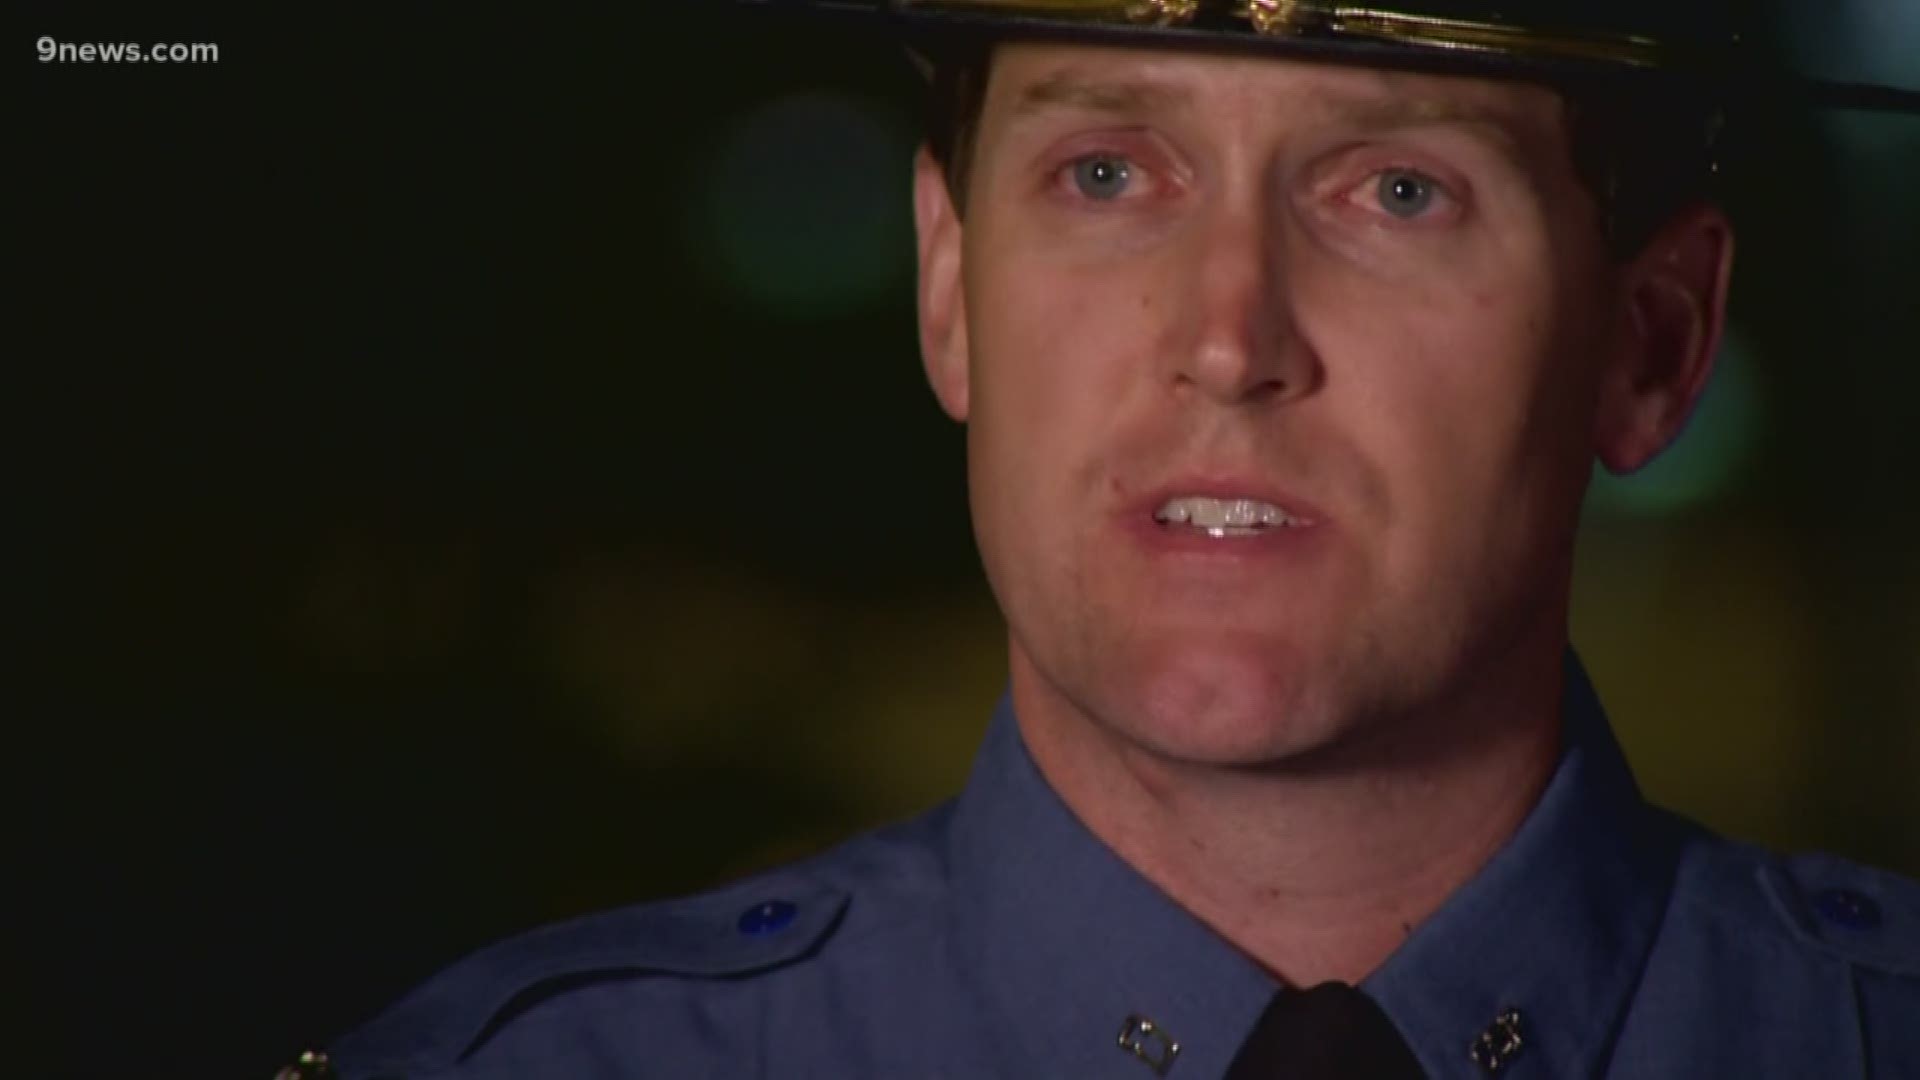 William Moden, 37, had been a state trooper for 12 years.